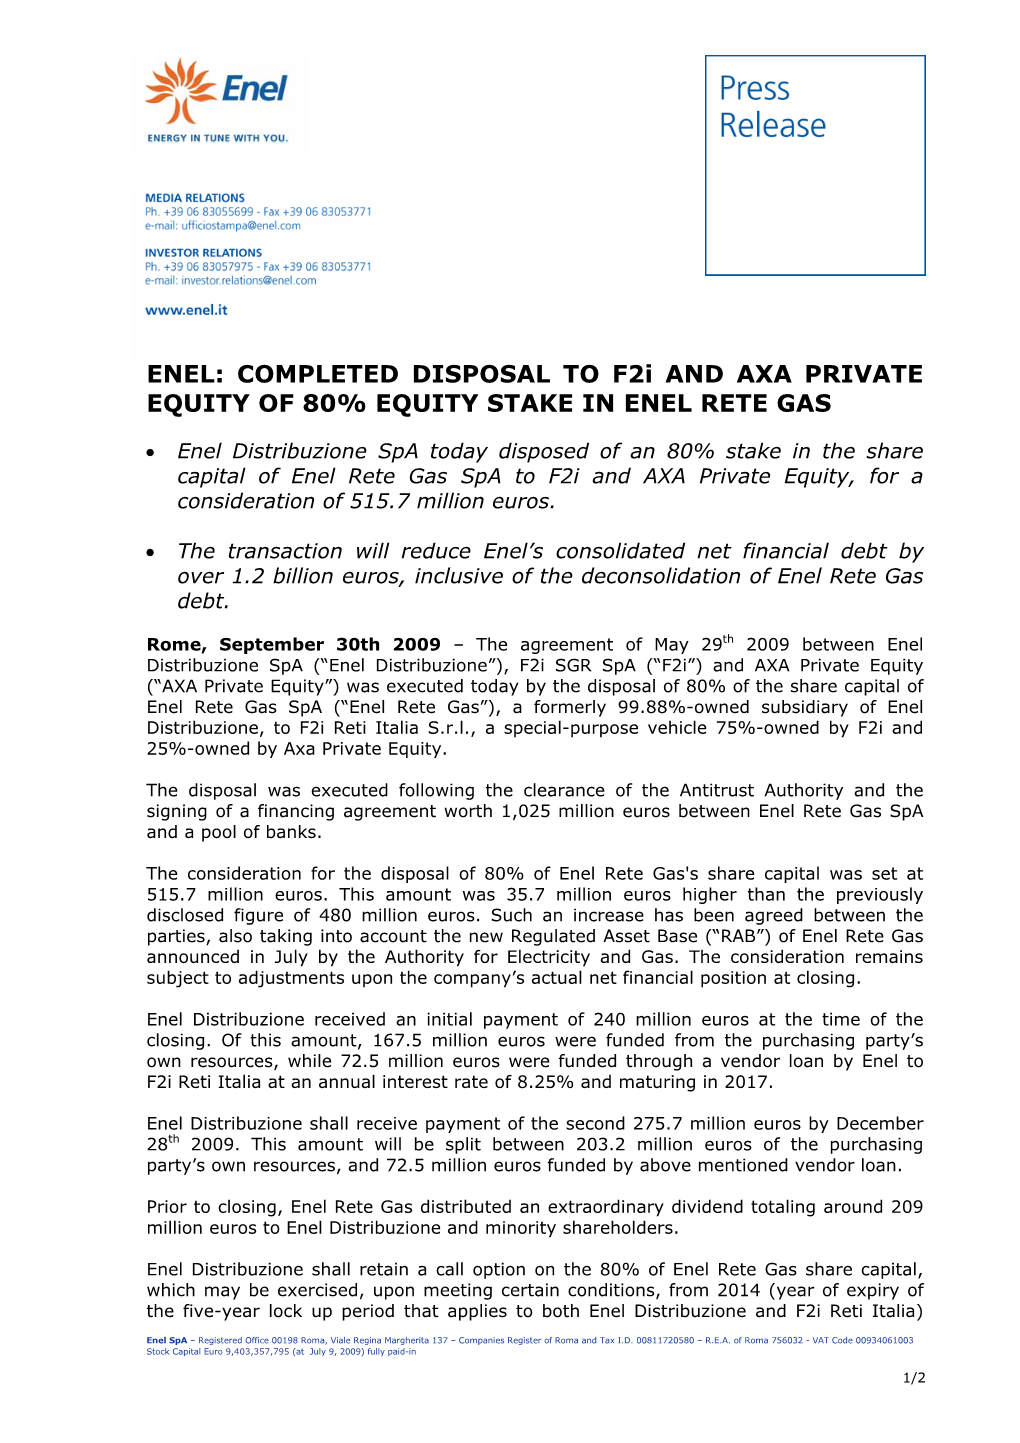 ENEL: COMPLETED DISPOSAL to F2i and AXA PRIVATE EQUITY of 80% EQUITY STAKE in ENEL RETE GAS